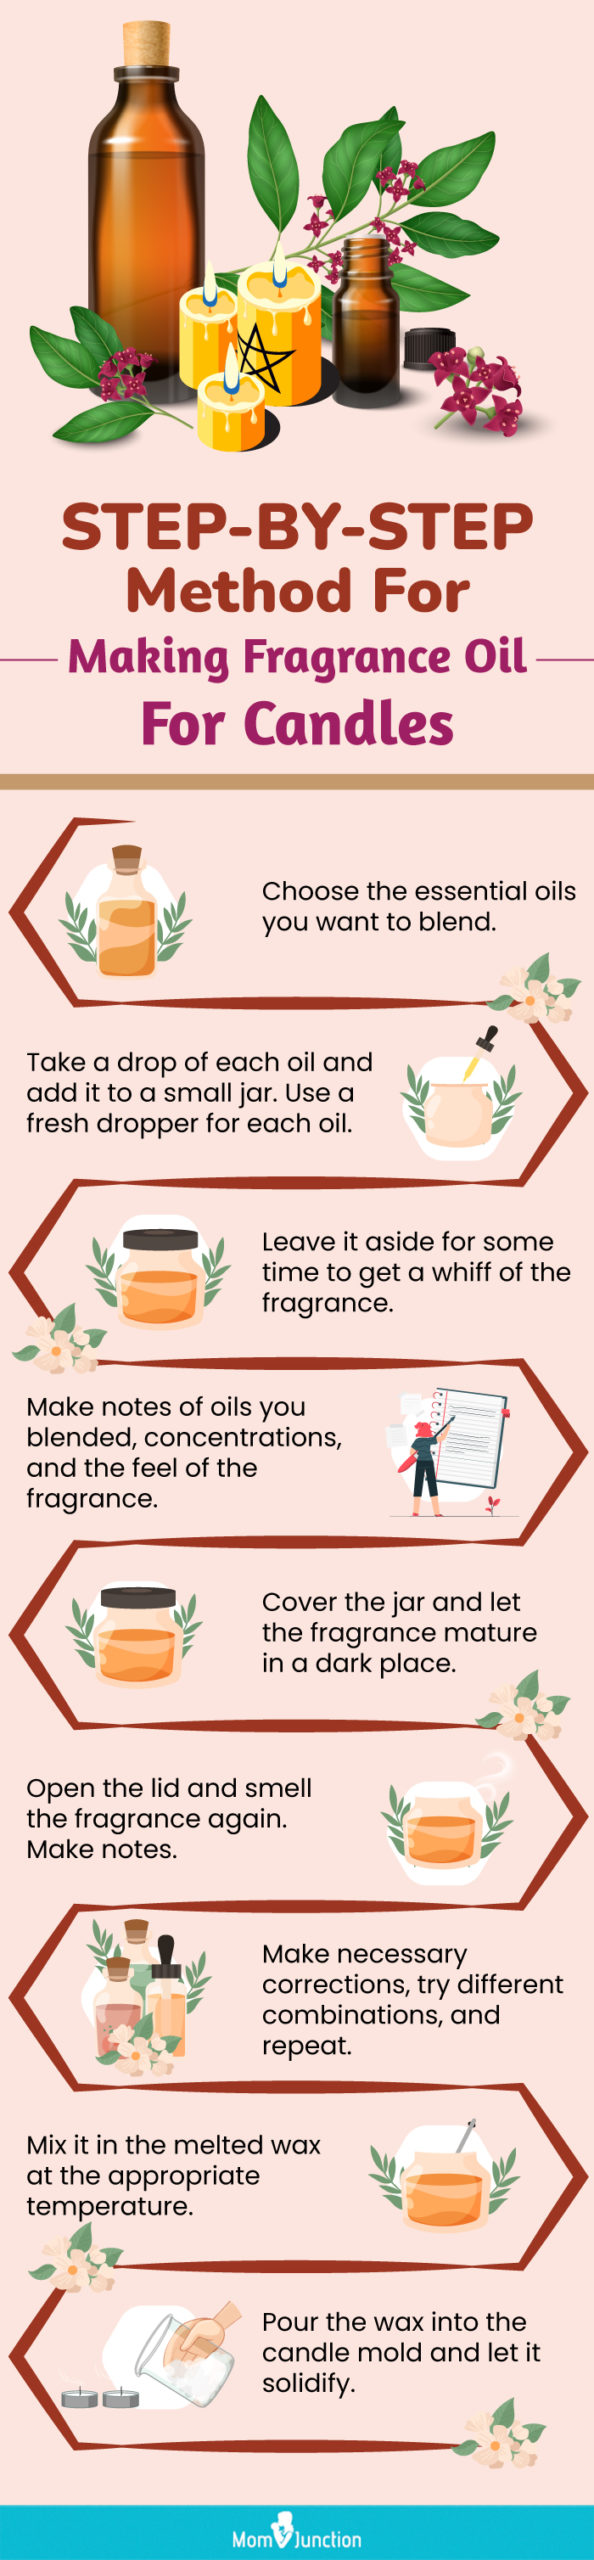 candle fragrance oil use in cologne making : r/DIYfragrance